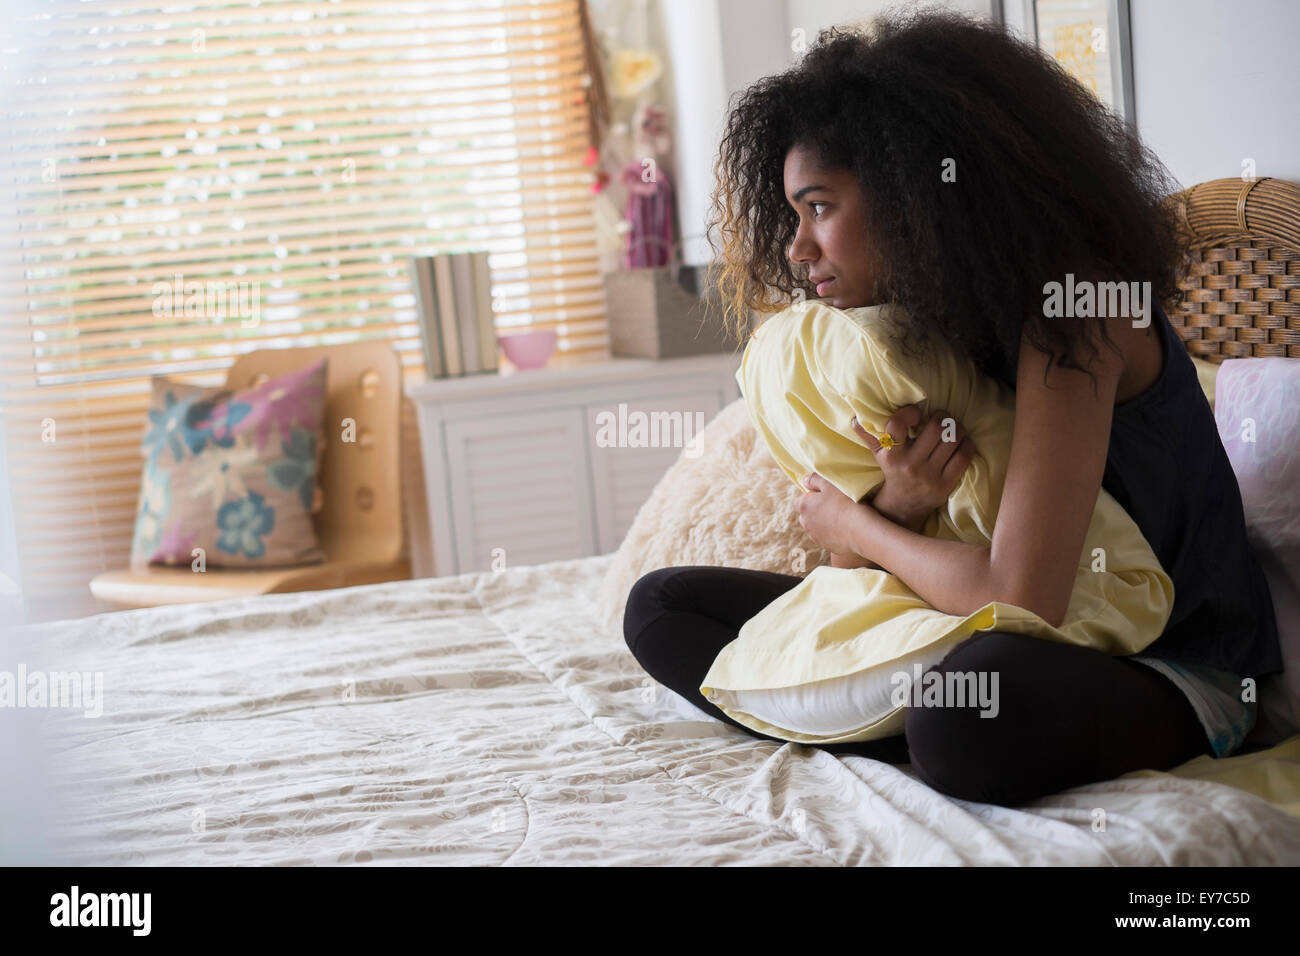 Teenage girl (14-15) sitting on bed, embracing pillow Stock Photo